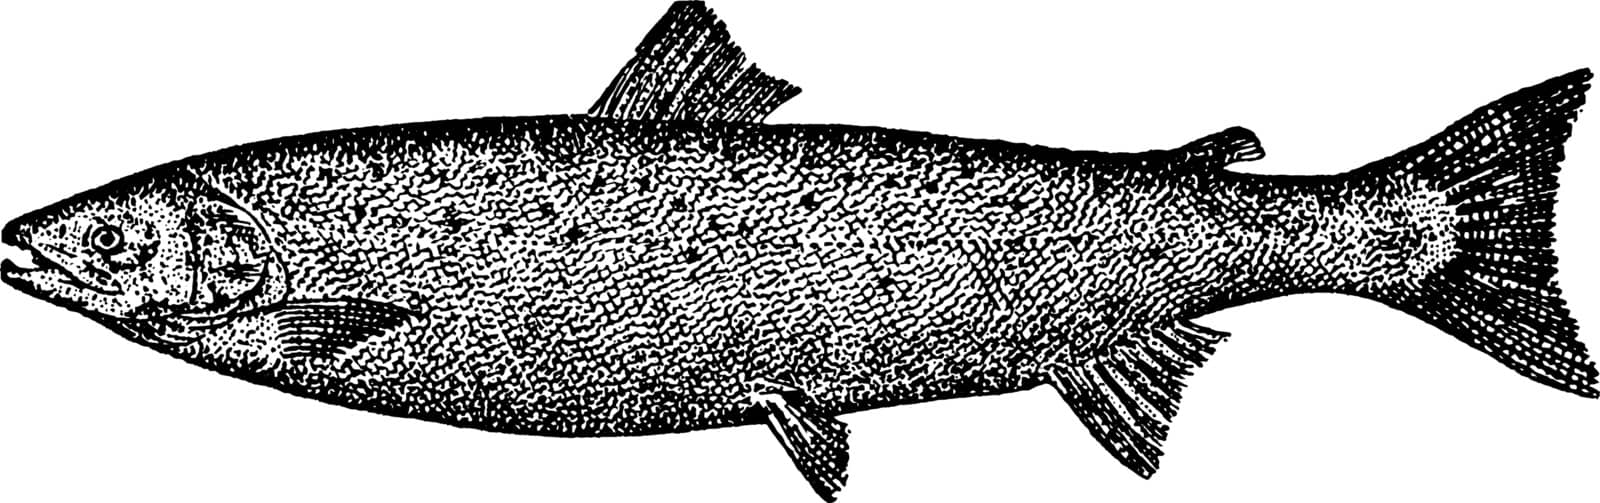 Atlantic Salmon is a migratory fish, vintage line drawing or engraving illustration.